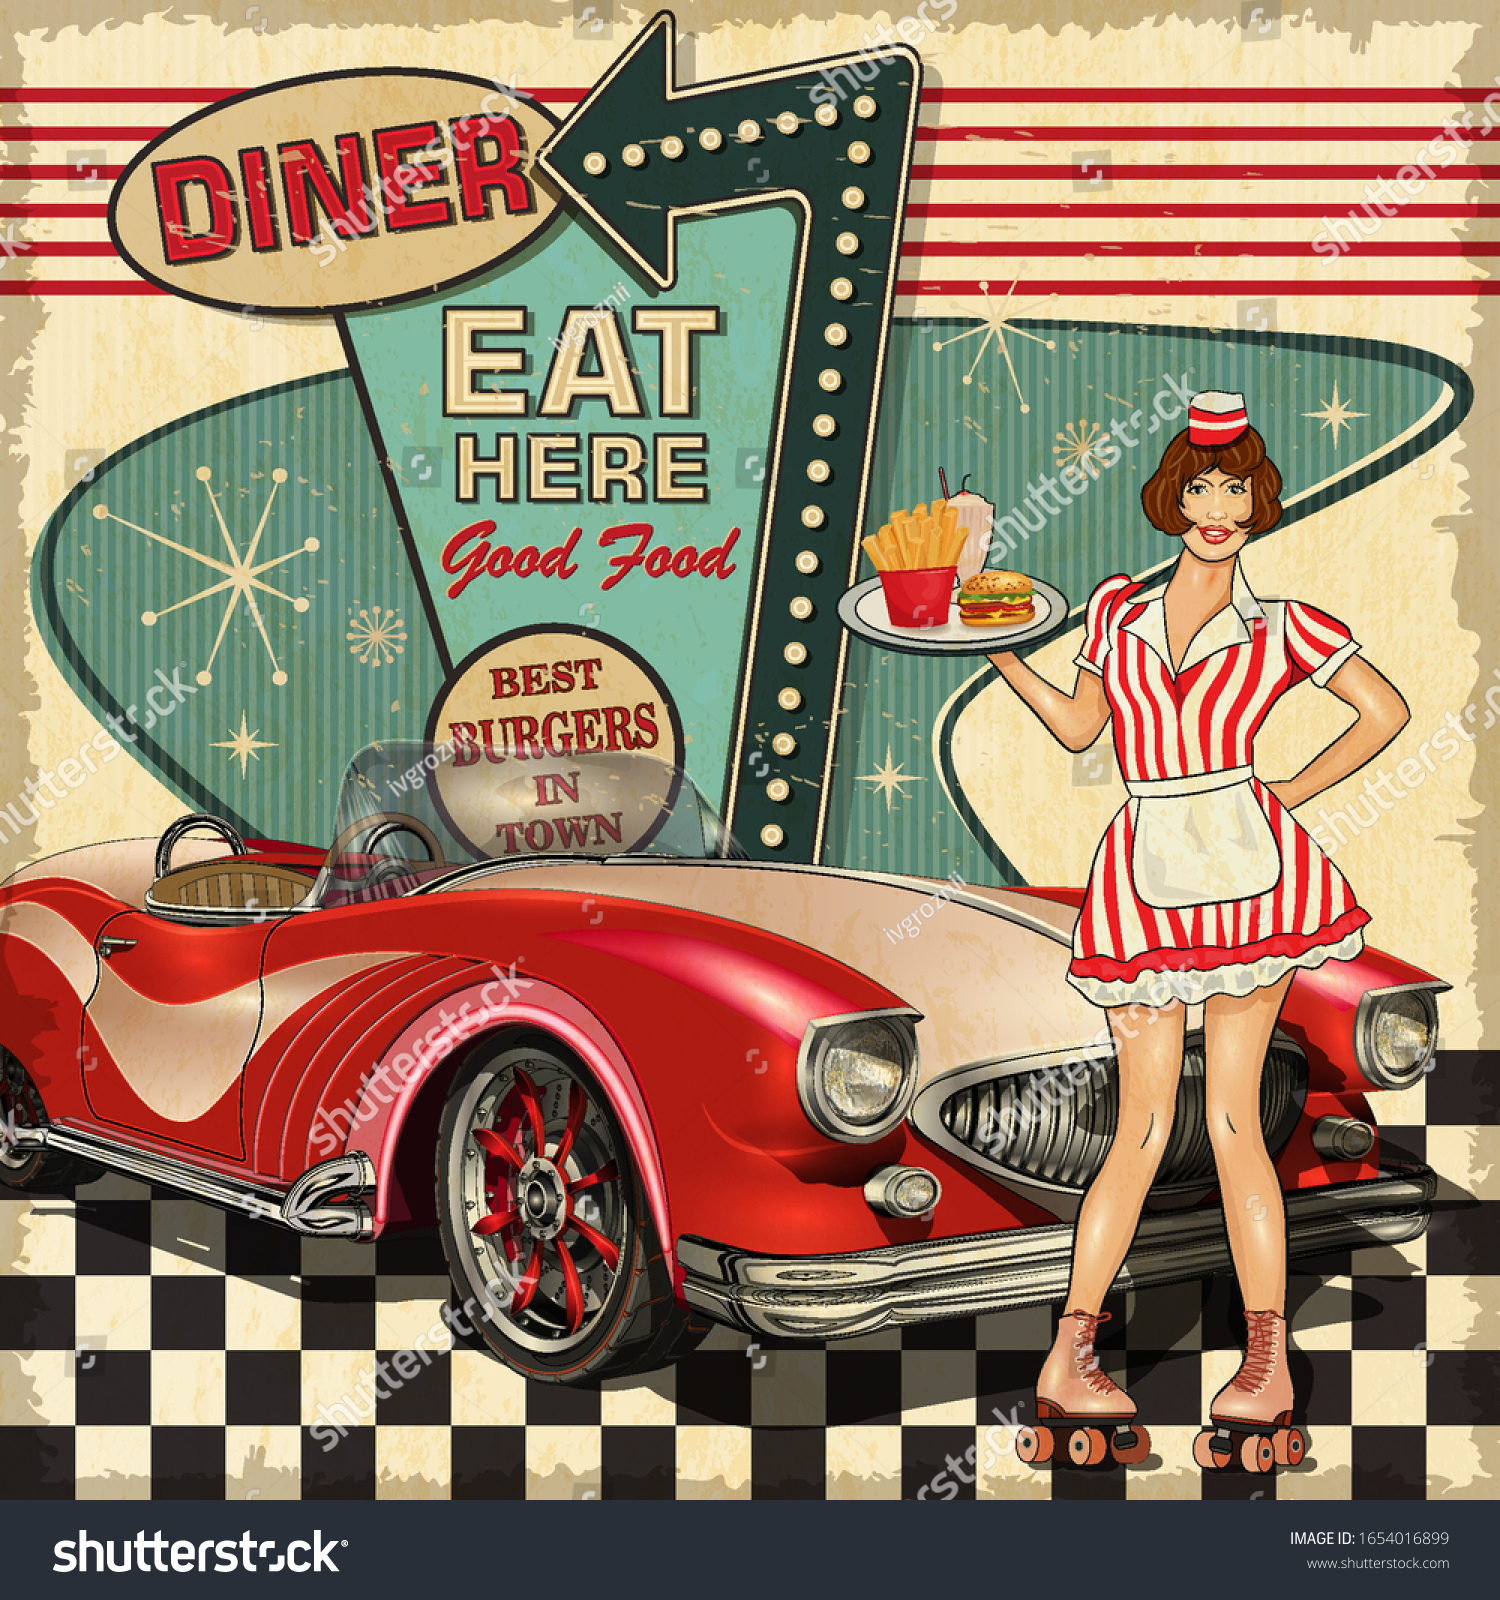 SVG of Vintage Diner poster in traditional American style with waitress on roller skates. svg